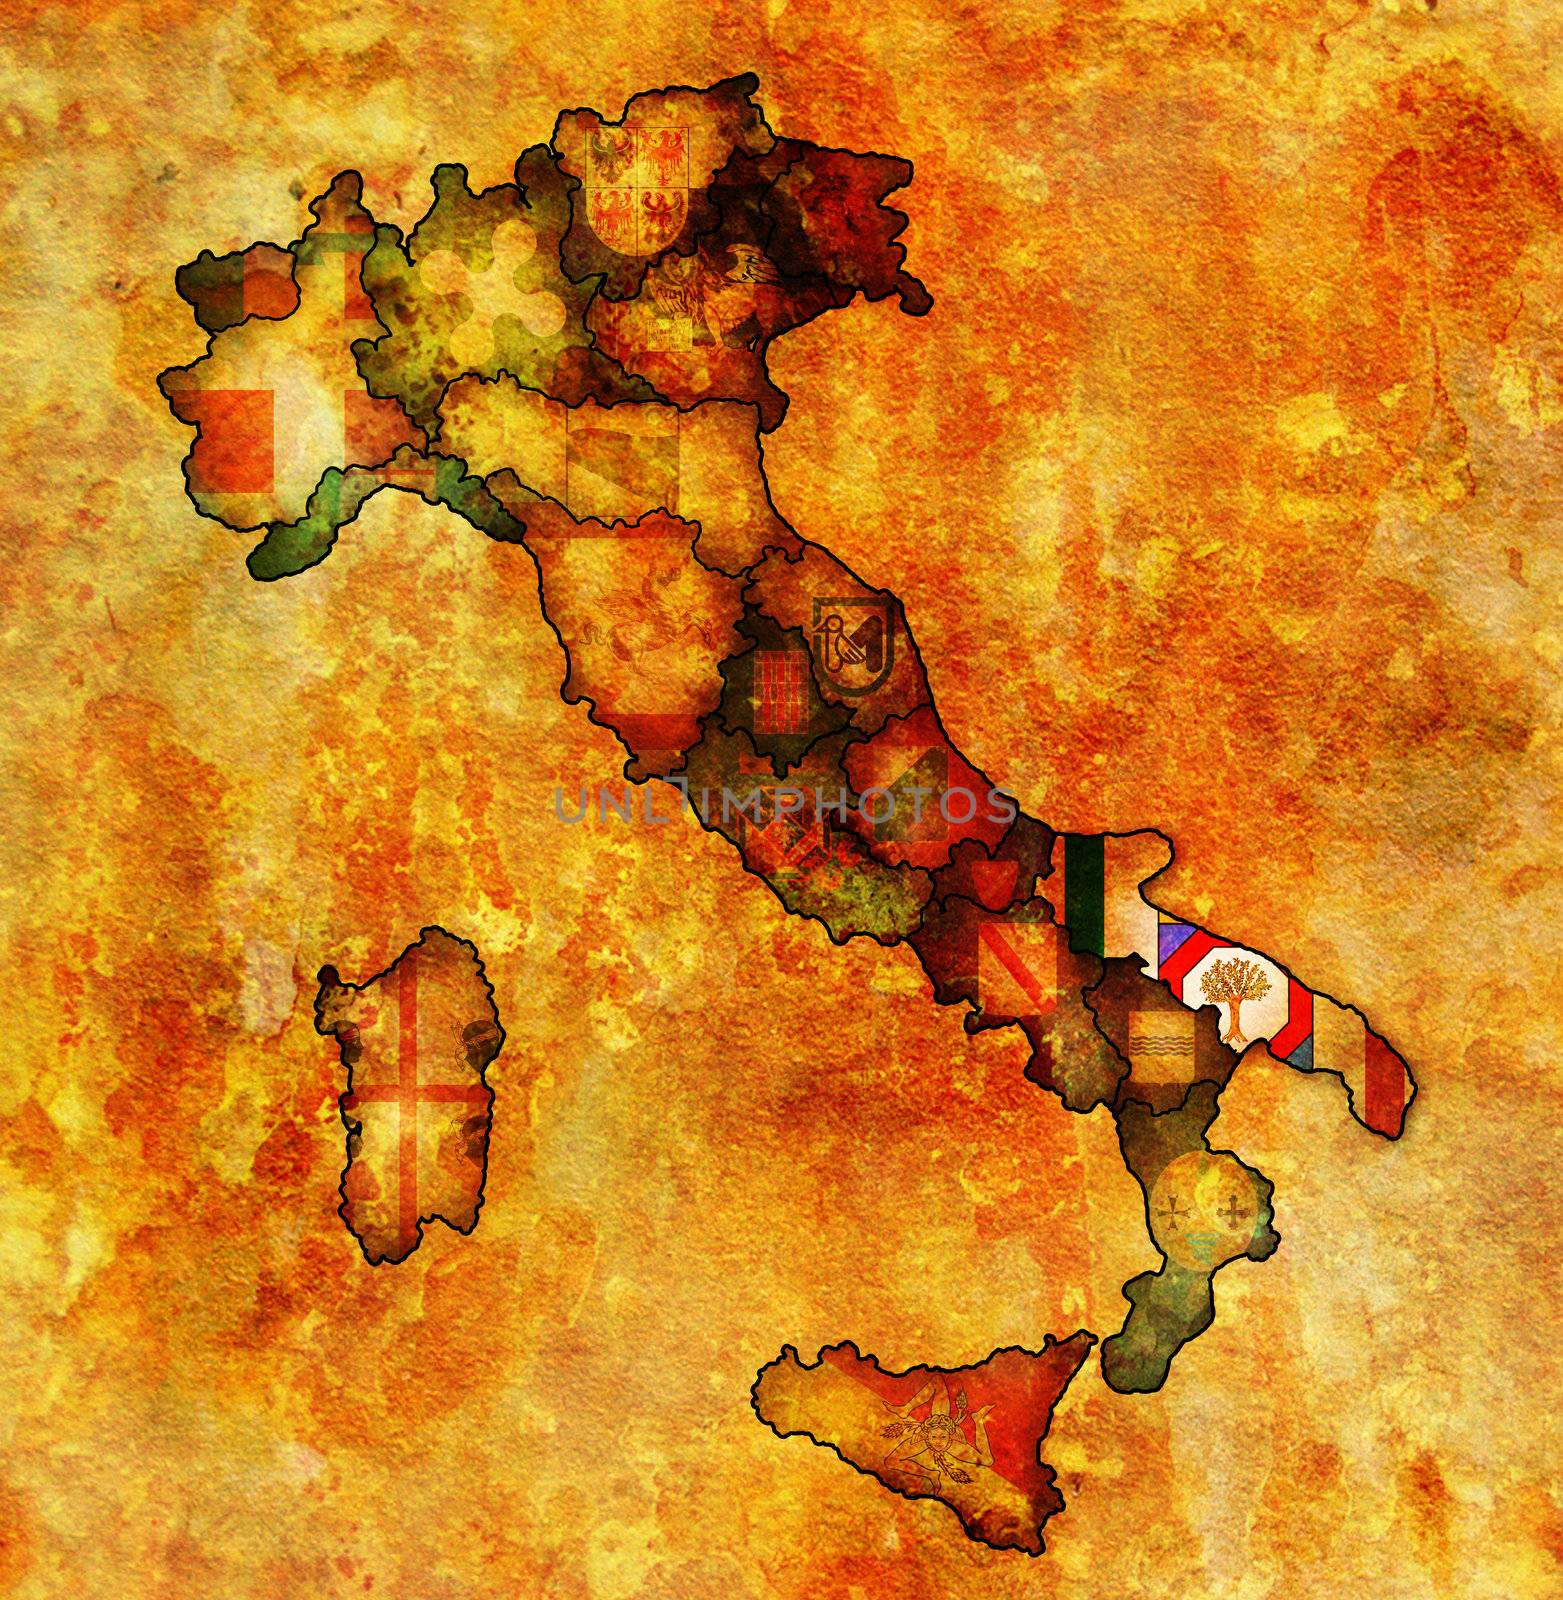 apulia region on administration map of italy with flags